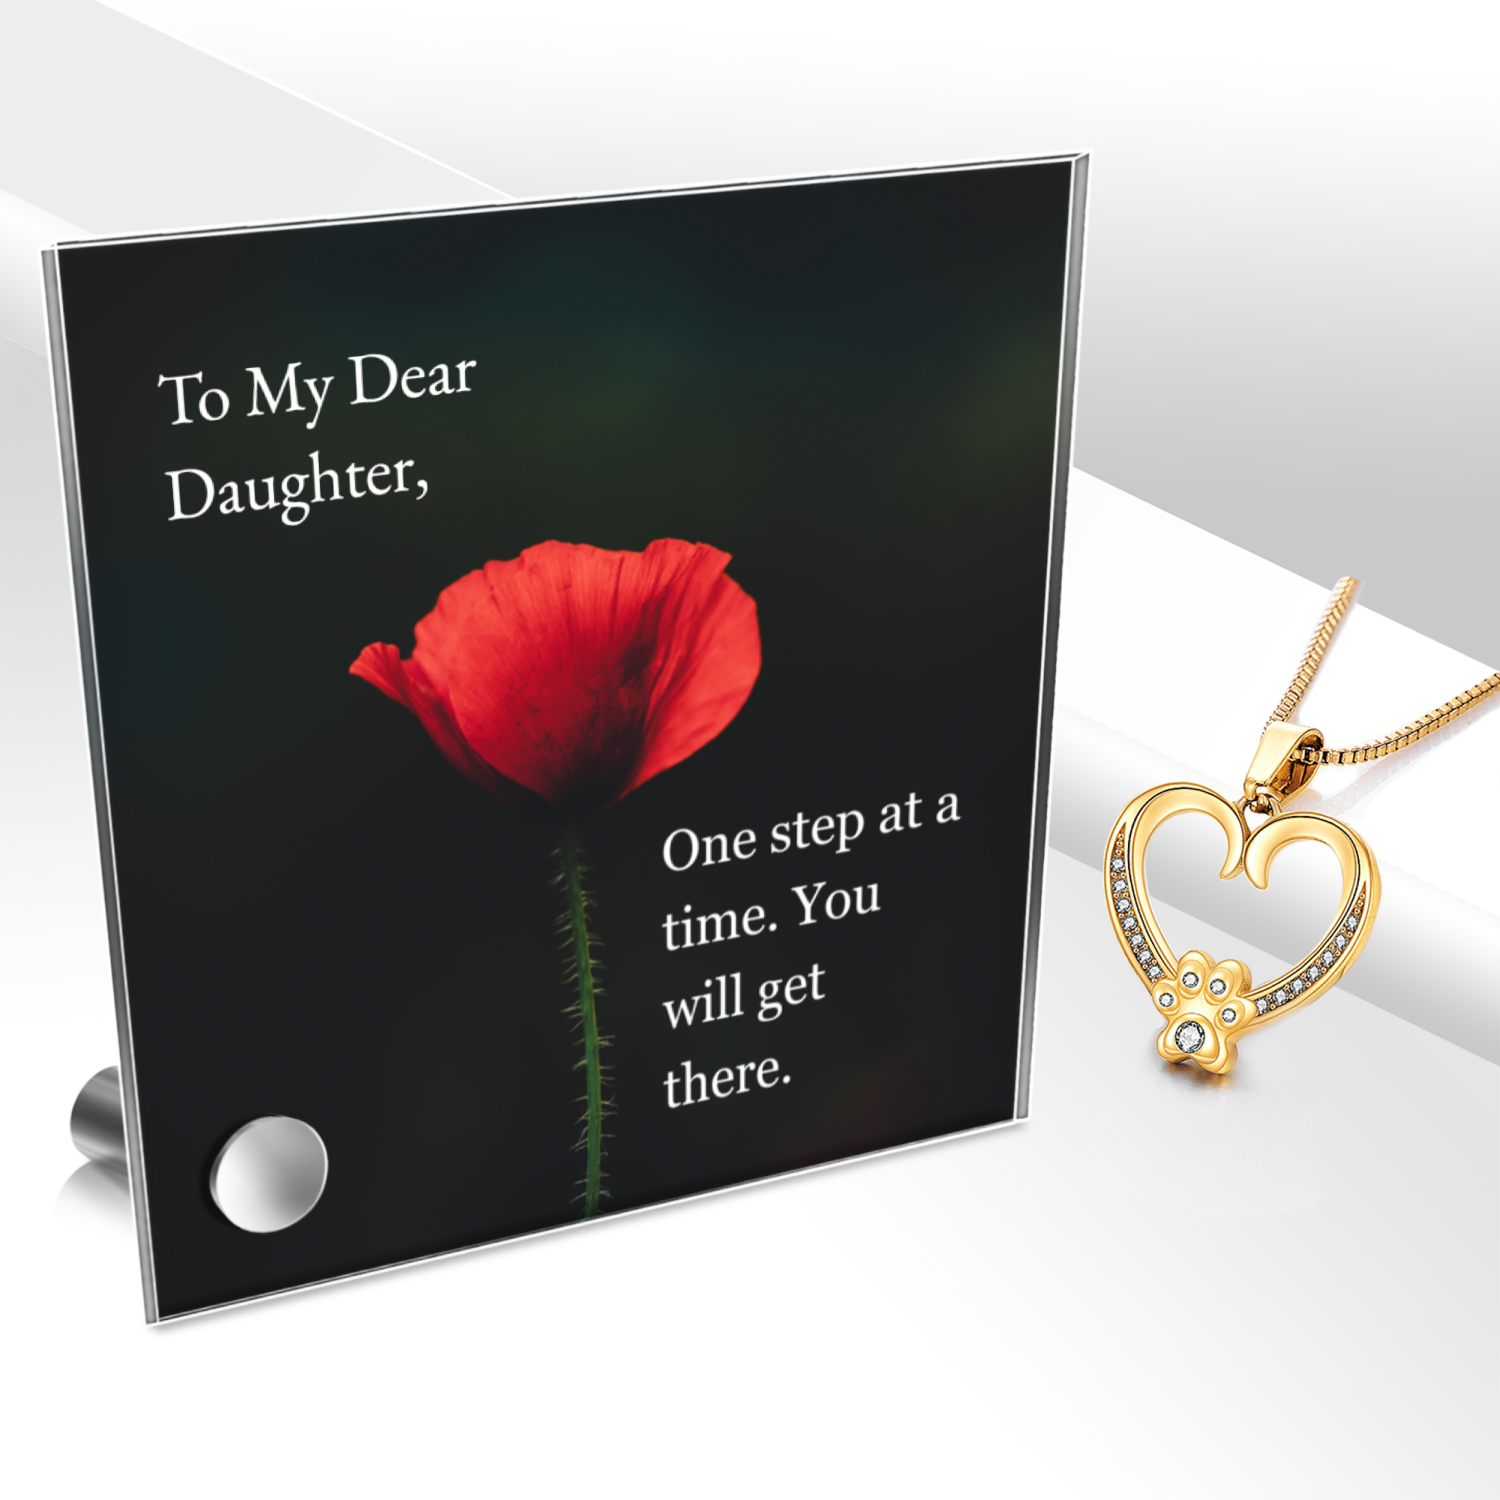 Personalized Necklaces - To My Daughter: Gold Paw Necklace + Glass Message Display 